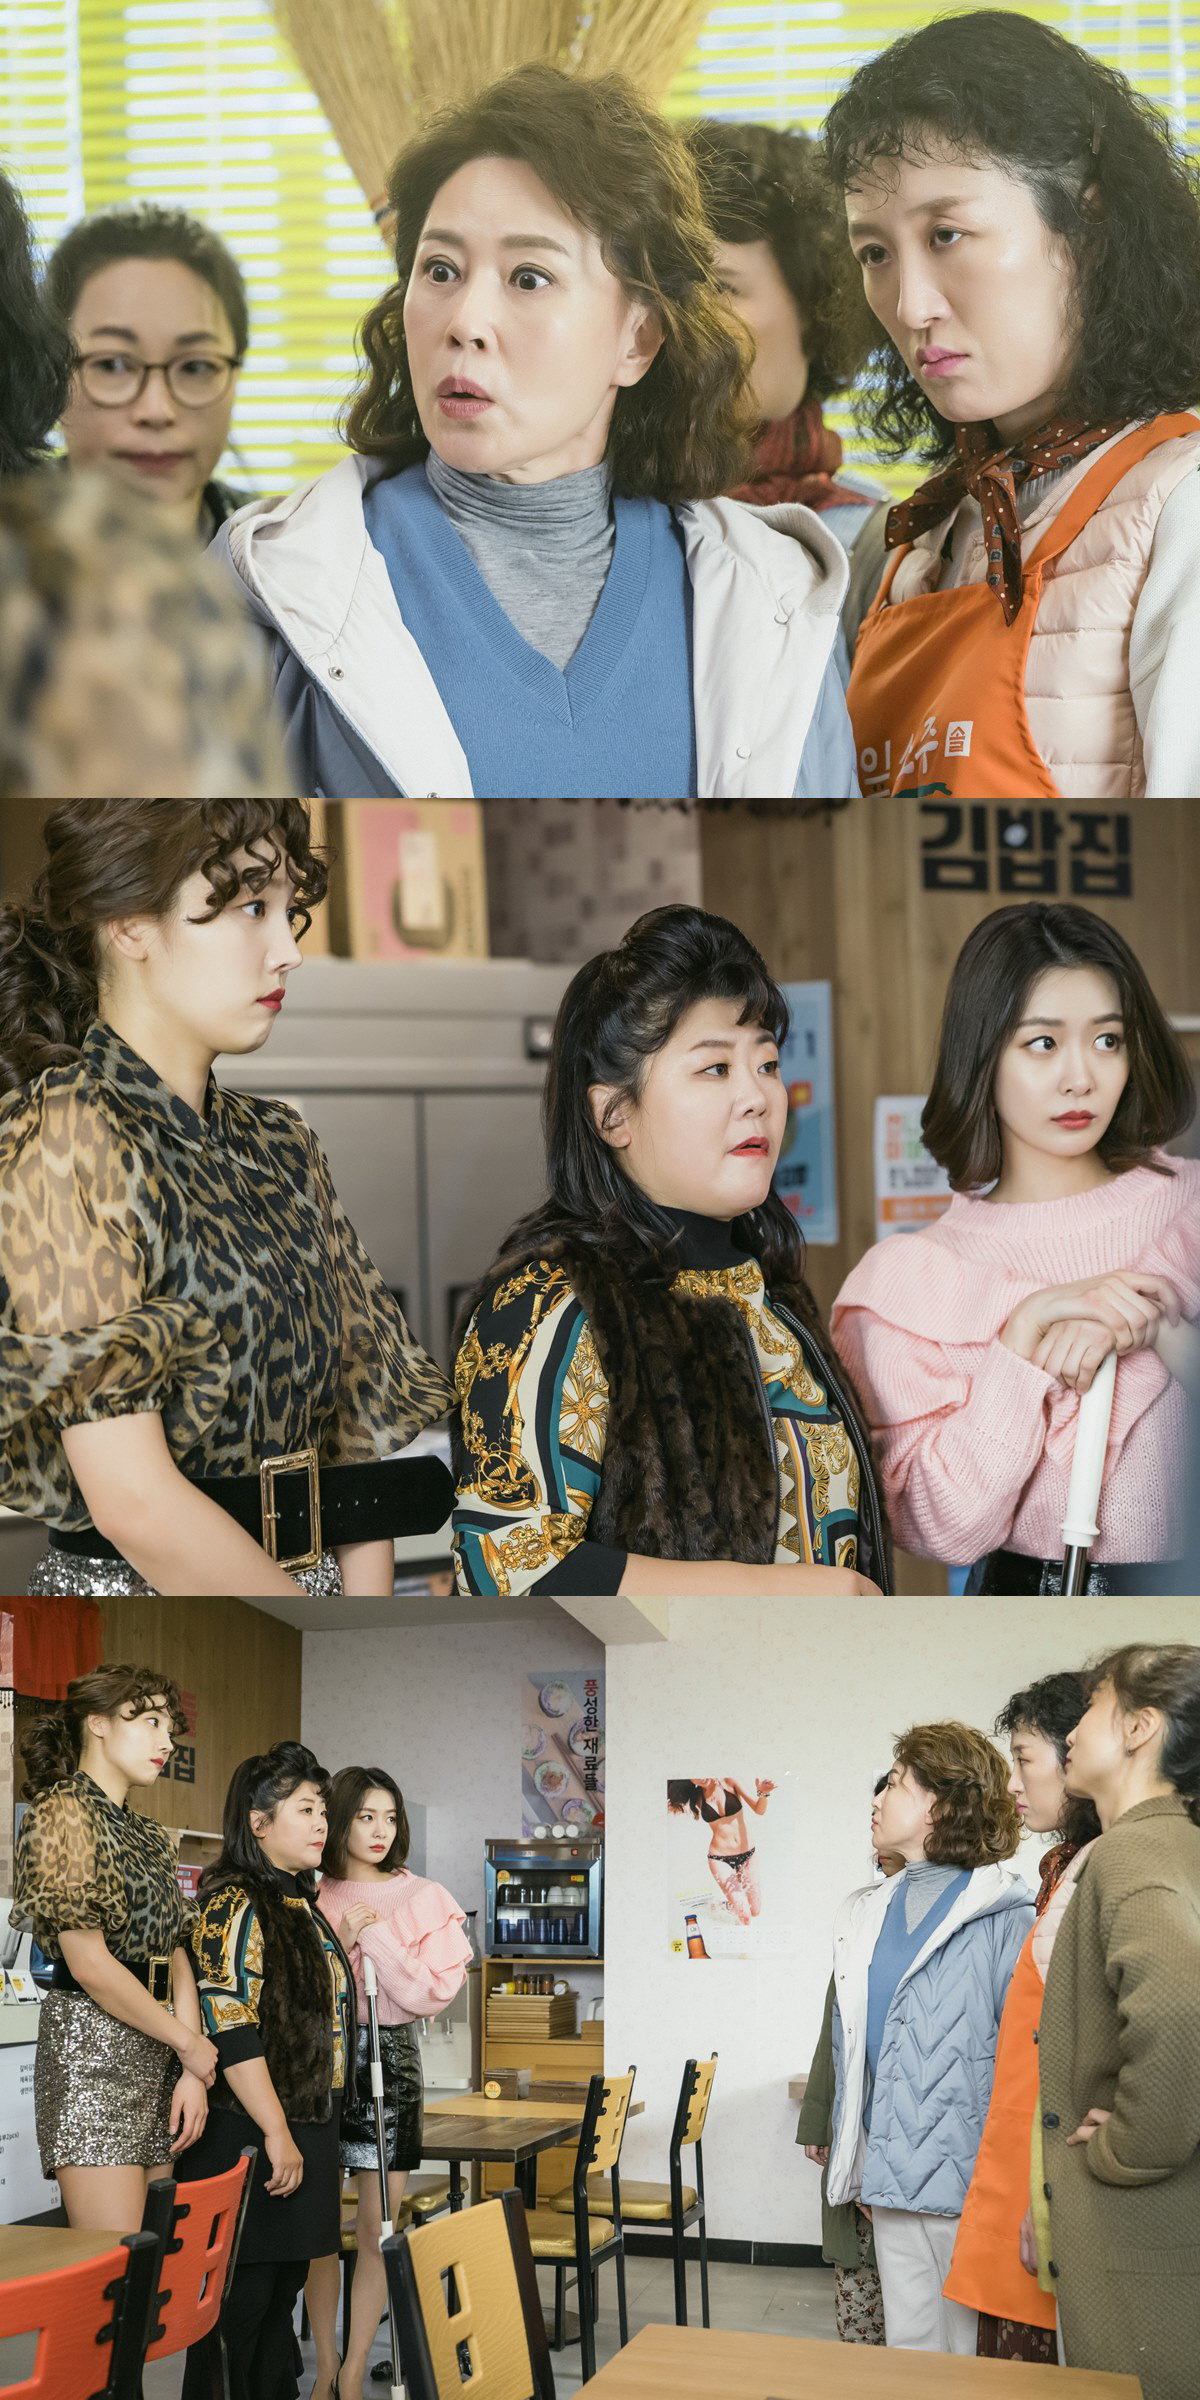 Cha Hwa-Yeon hits Kimbap house in Lee Jung EunKBS 2TV Weekend drama Ive Goed Once (playplayplay by Yang Hee-seung, director Lee Jae-sang, production Studio Dragon, main factory) has been on the air for 3 weeks, and has been enjoying high topics and popularity with 29.6% of TV viewer ratings (Nilson Korea provided, nationwide).In the 13th and 14th episodes broadcast on the 18th (Saturday), it will be interesting to see the face-to-face situation of Cha Hwa-Yeon (Jang Ok-bun station) and Lee Jung Eun ( premiere station).In the previous broadcast, the premiere of entering the market and bumping into merchants was drawn.The song, which was so loud that it hurt to celebrate the opening ceremony as well as the colorful attire, was protested by the merchants.Song Young-dal (Chun Ho-jin) was sorely shot at the Kimbap house of the premiere, but the premiere shouted at his nagging and formed tension.Among them, the photos show the premiere (Lee Jung Eun) and Jang Ok-bun (Cha Hwa-Yeon) facing each other in the Kimbap house, and it is foreseeing an unusual atmosphere somewhere.Jang Ok-bum looks at the premiere with a dissatisfied eye, and the premiere is facing her with a burning eye.Especially on this day, Jang Ok-bun tells the premiere, I came to warn you!In addition, the premiere was favorable to Jang Ok-bum only because he was the wife of Song Young-dal, the merchant chairman.I am curious about what kind of confrontation they will set up, and interest in this broadcast is increasing.KBS 2TV Weekend drama Ive Goed Once, which raises the expectation of viewers with unpredictable relationship, will be broadcast at 7:55 pm on the 18th (Saturday).